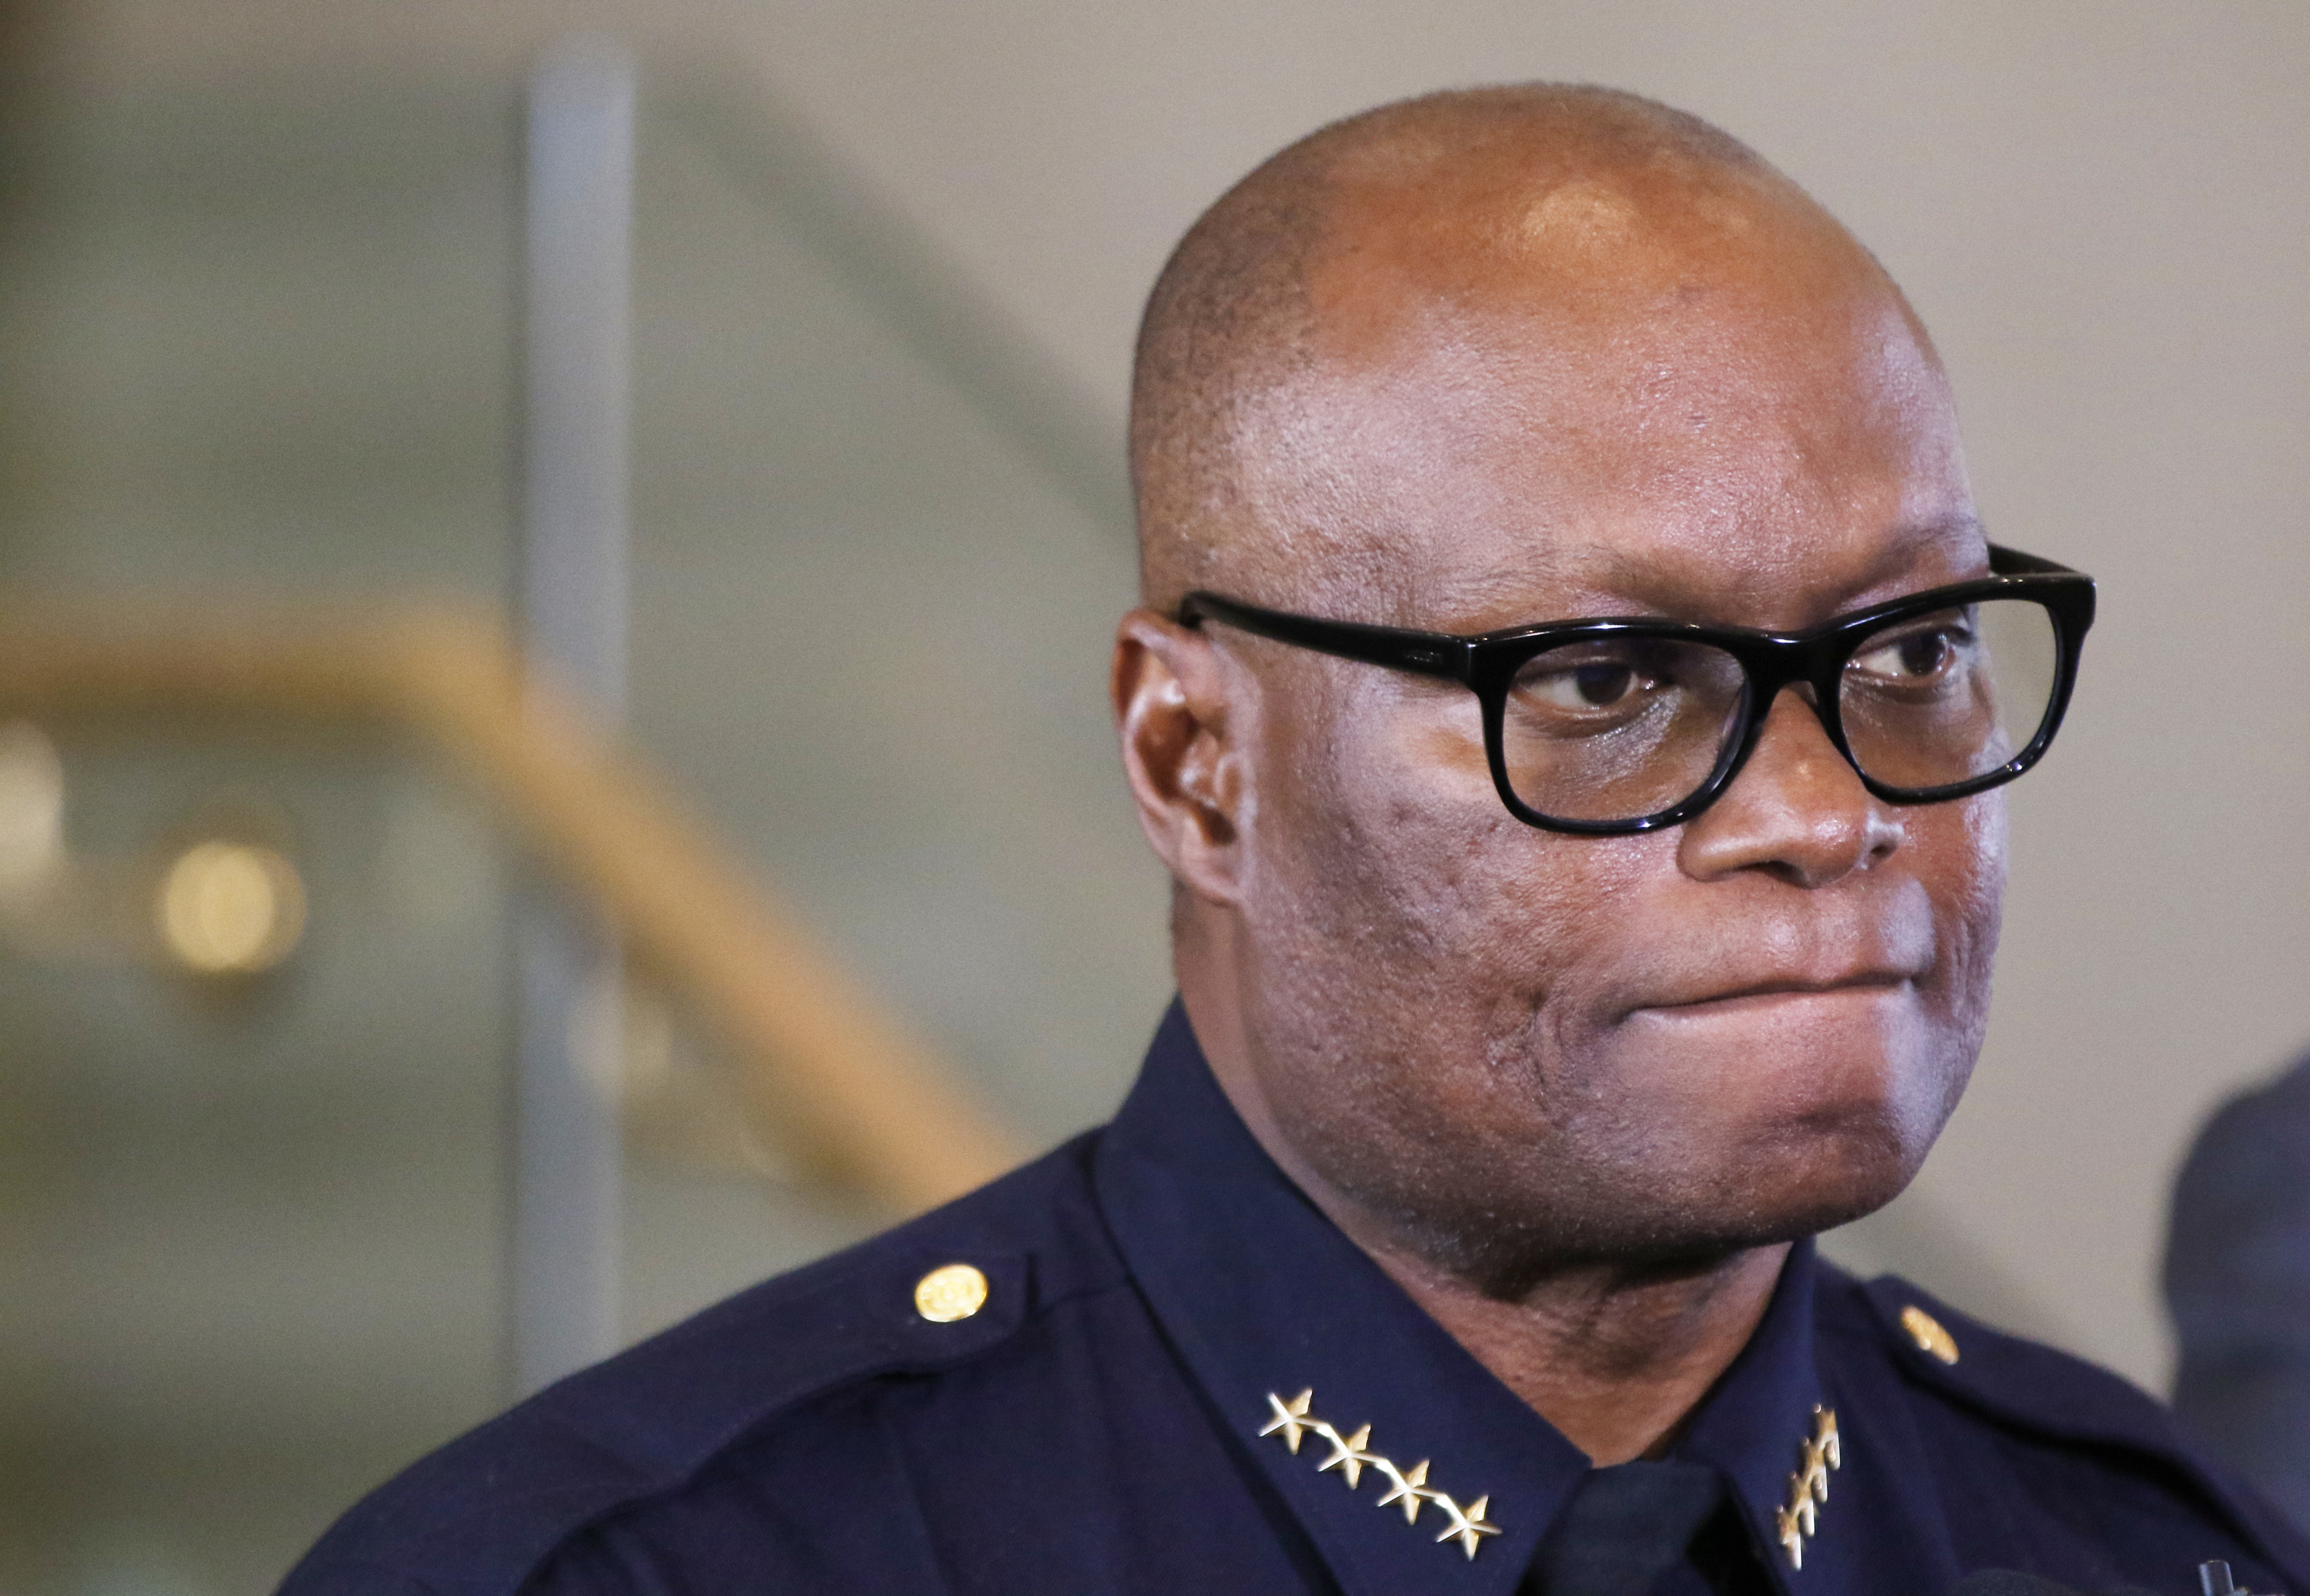 Dallas police chief David Brown has dealt with his own personal losses |  